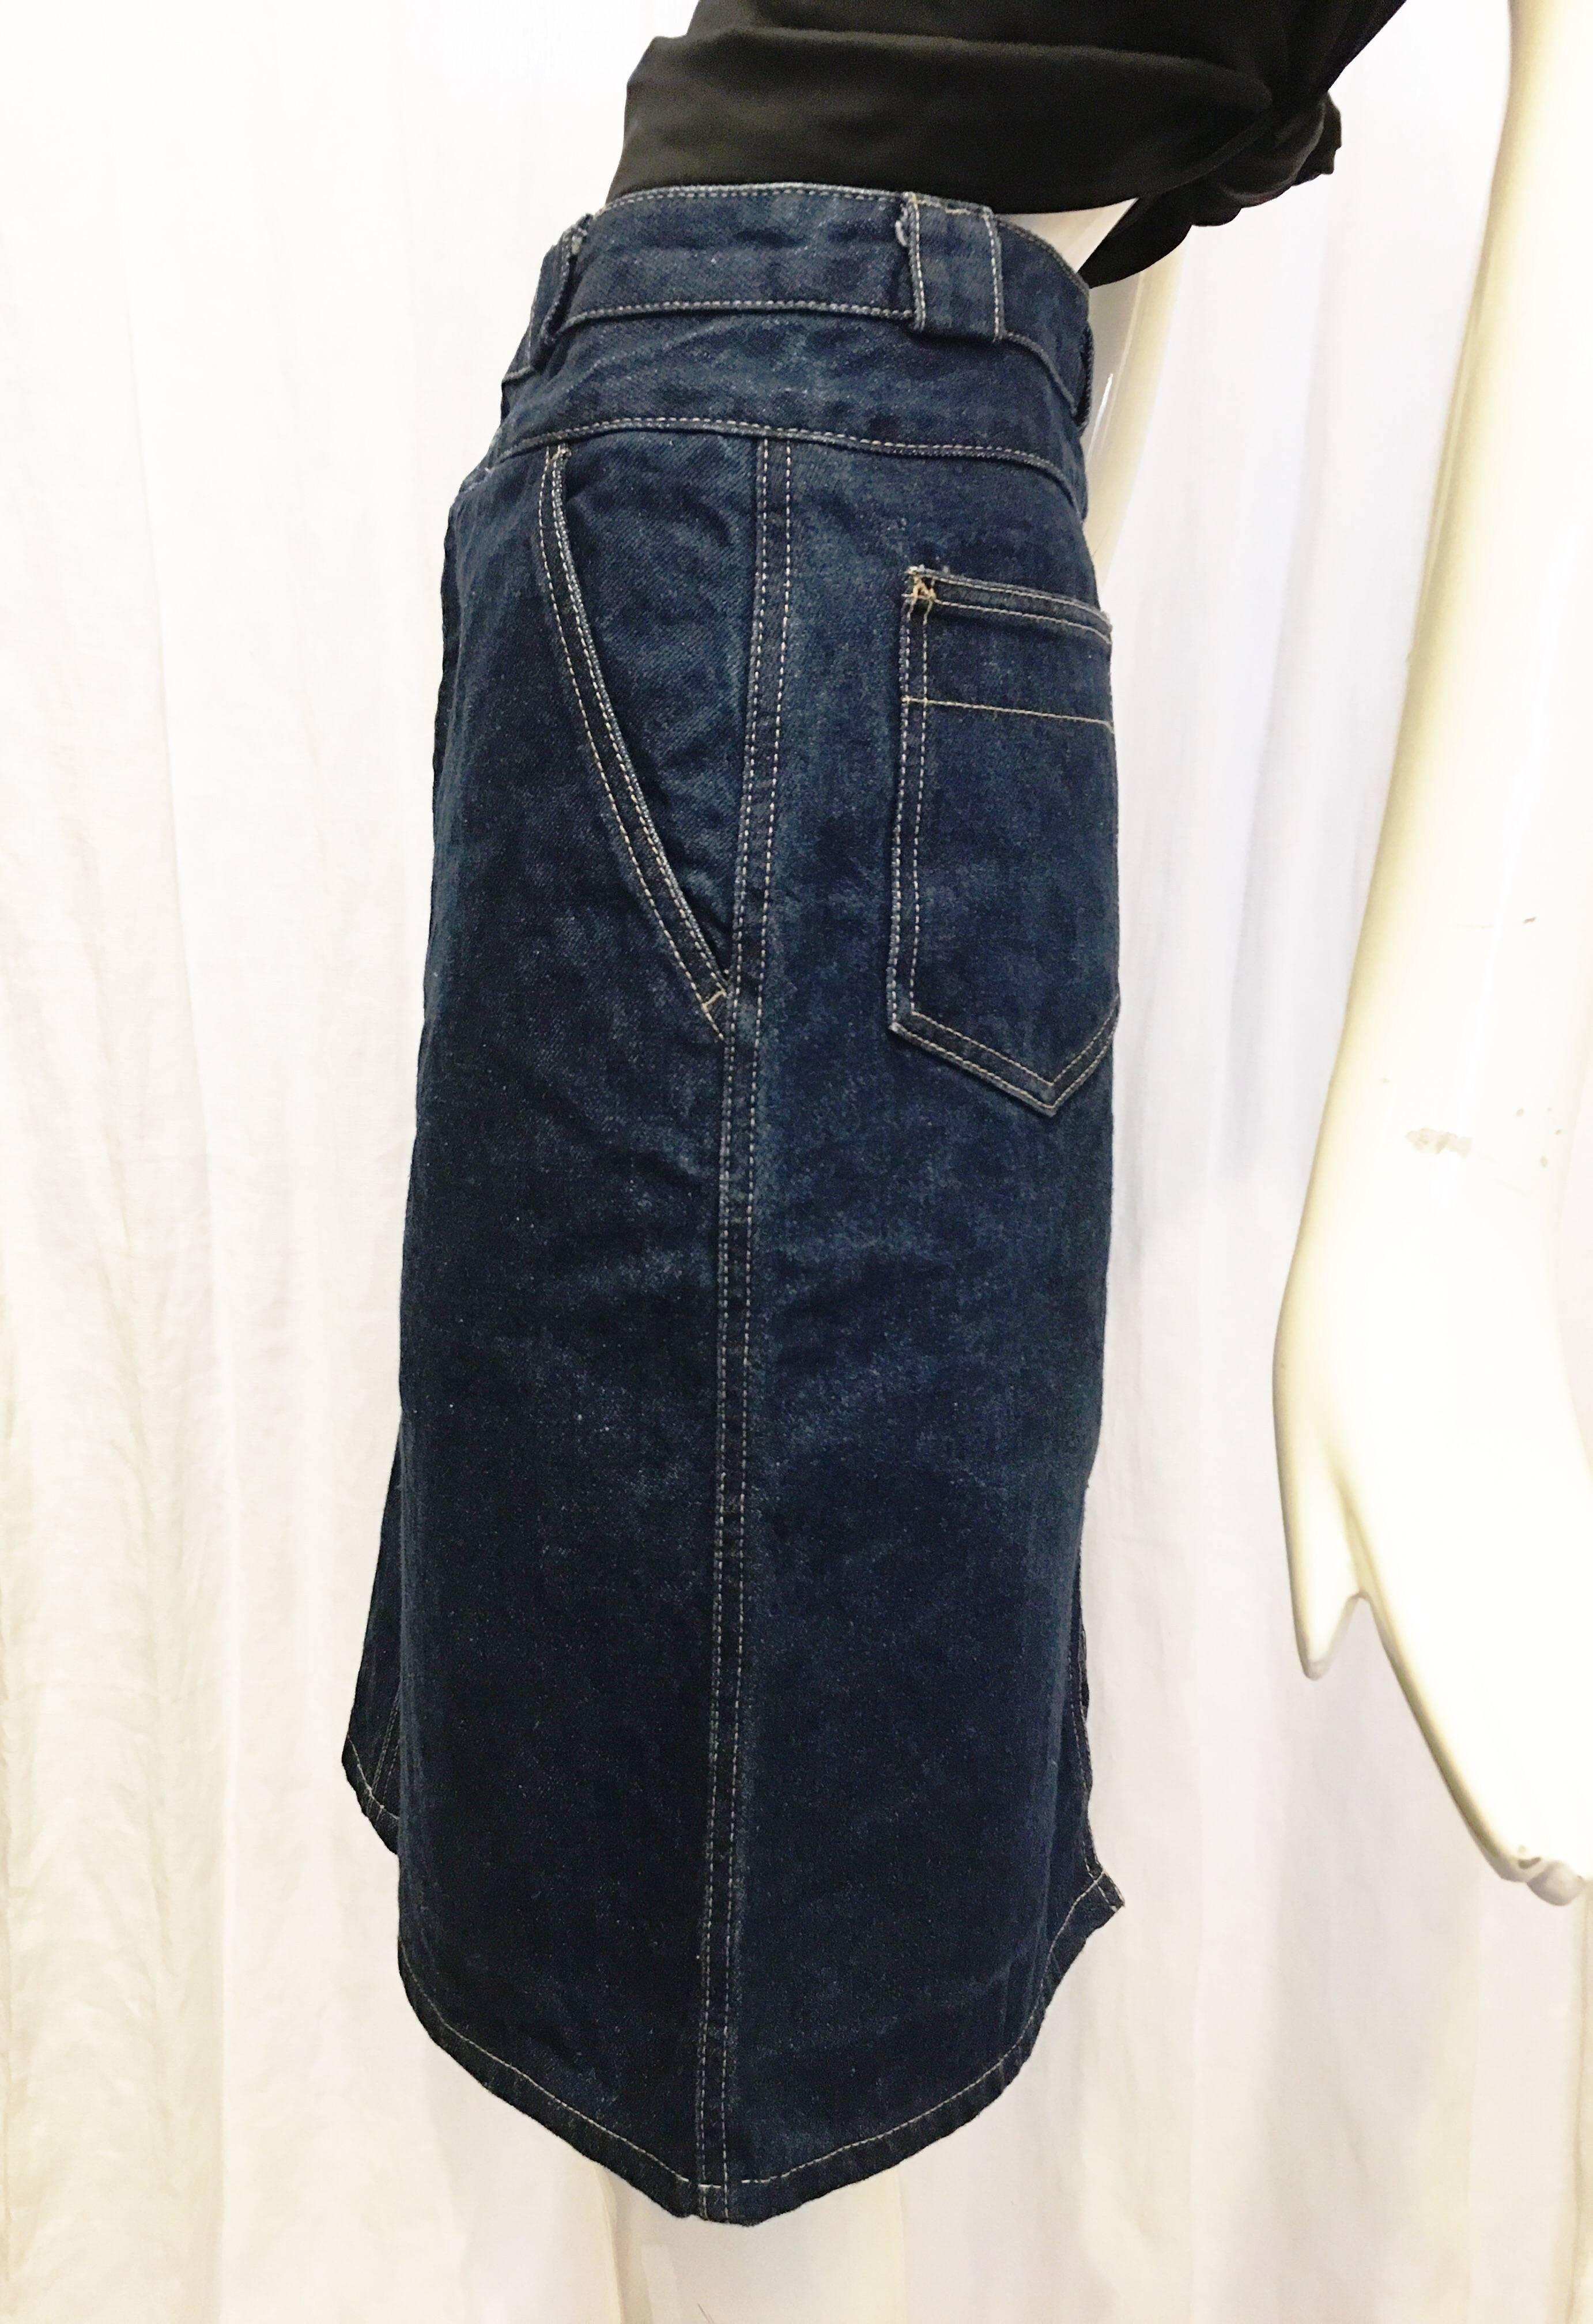 Classic denim pencil skirt from Calvin Klein. Two front pockets at hips. Double waist band with a button at each. Zipper fly beneath buttons. Two back pockets. 6.5 inch slit at back hem. Denim is on the stiff side, not much give. Skirt looks unworn.